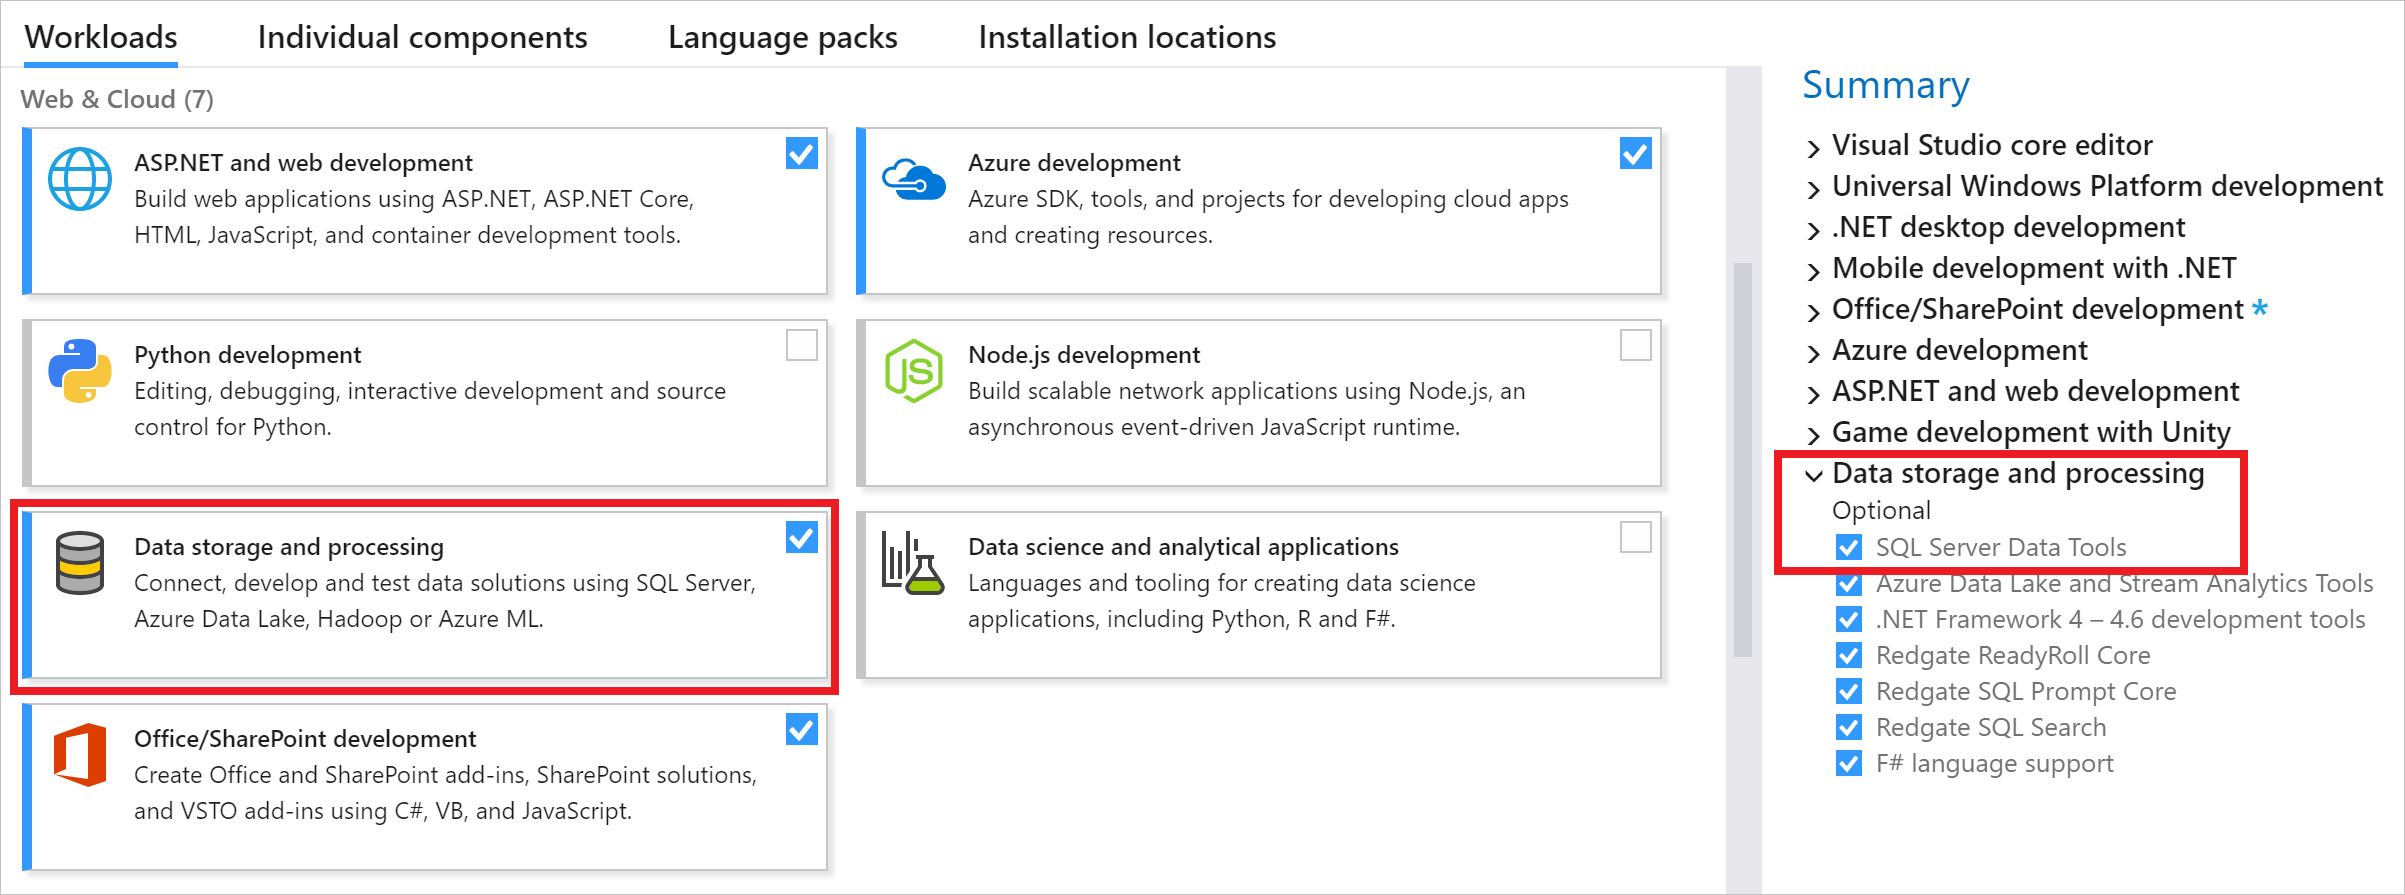 Previous releases of SQL Server Data Tools (SSDT) - SQL Server Data Tools ( SSDT) | Microsoft Learn